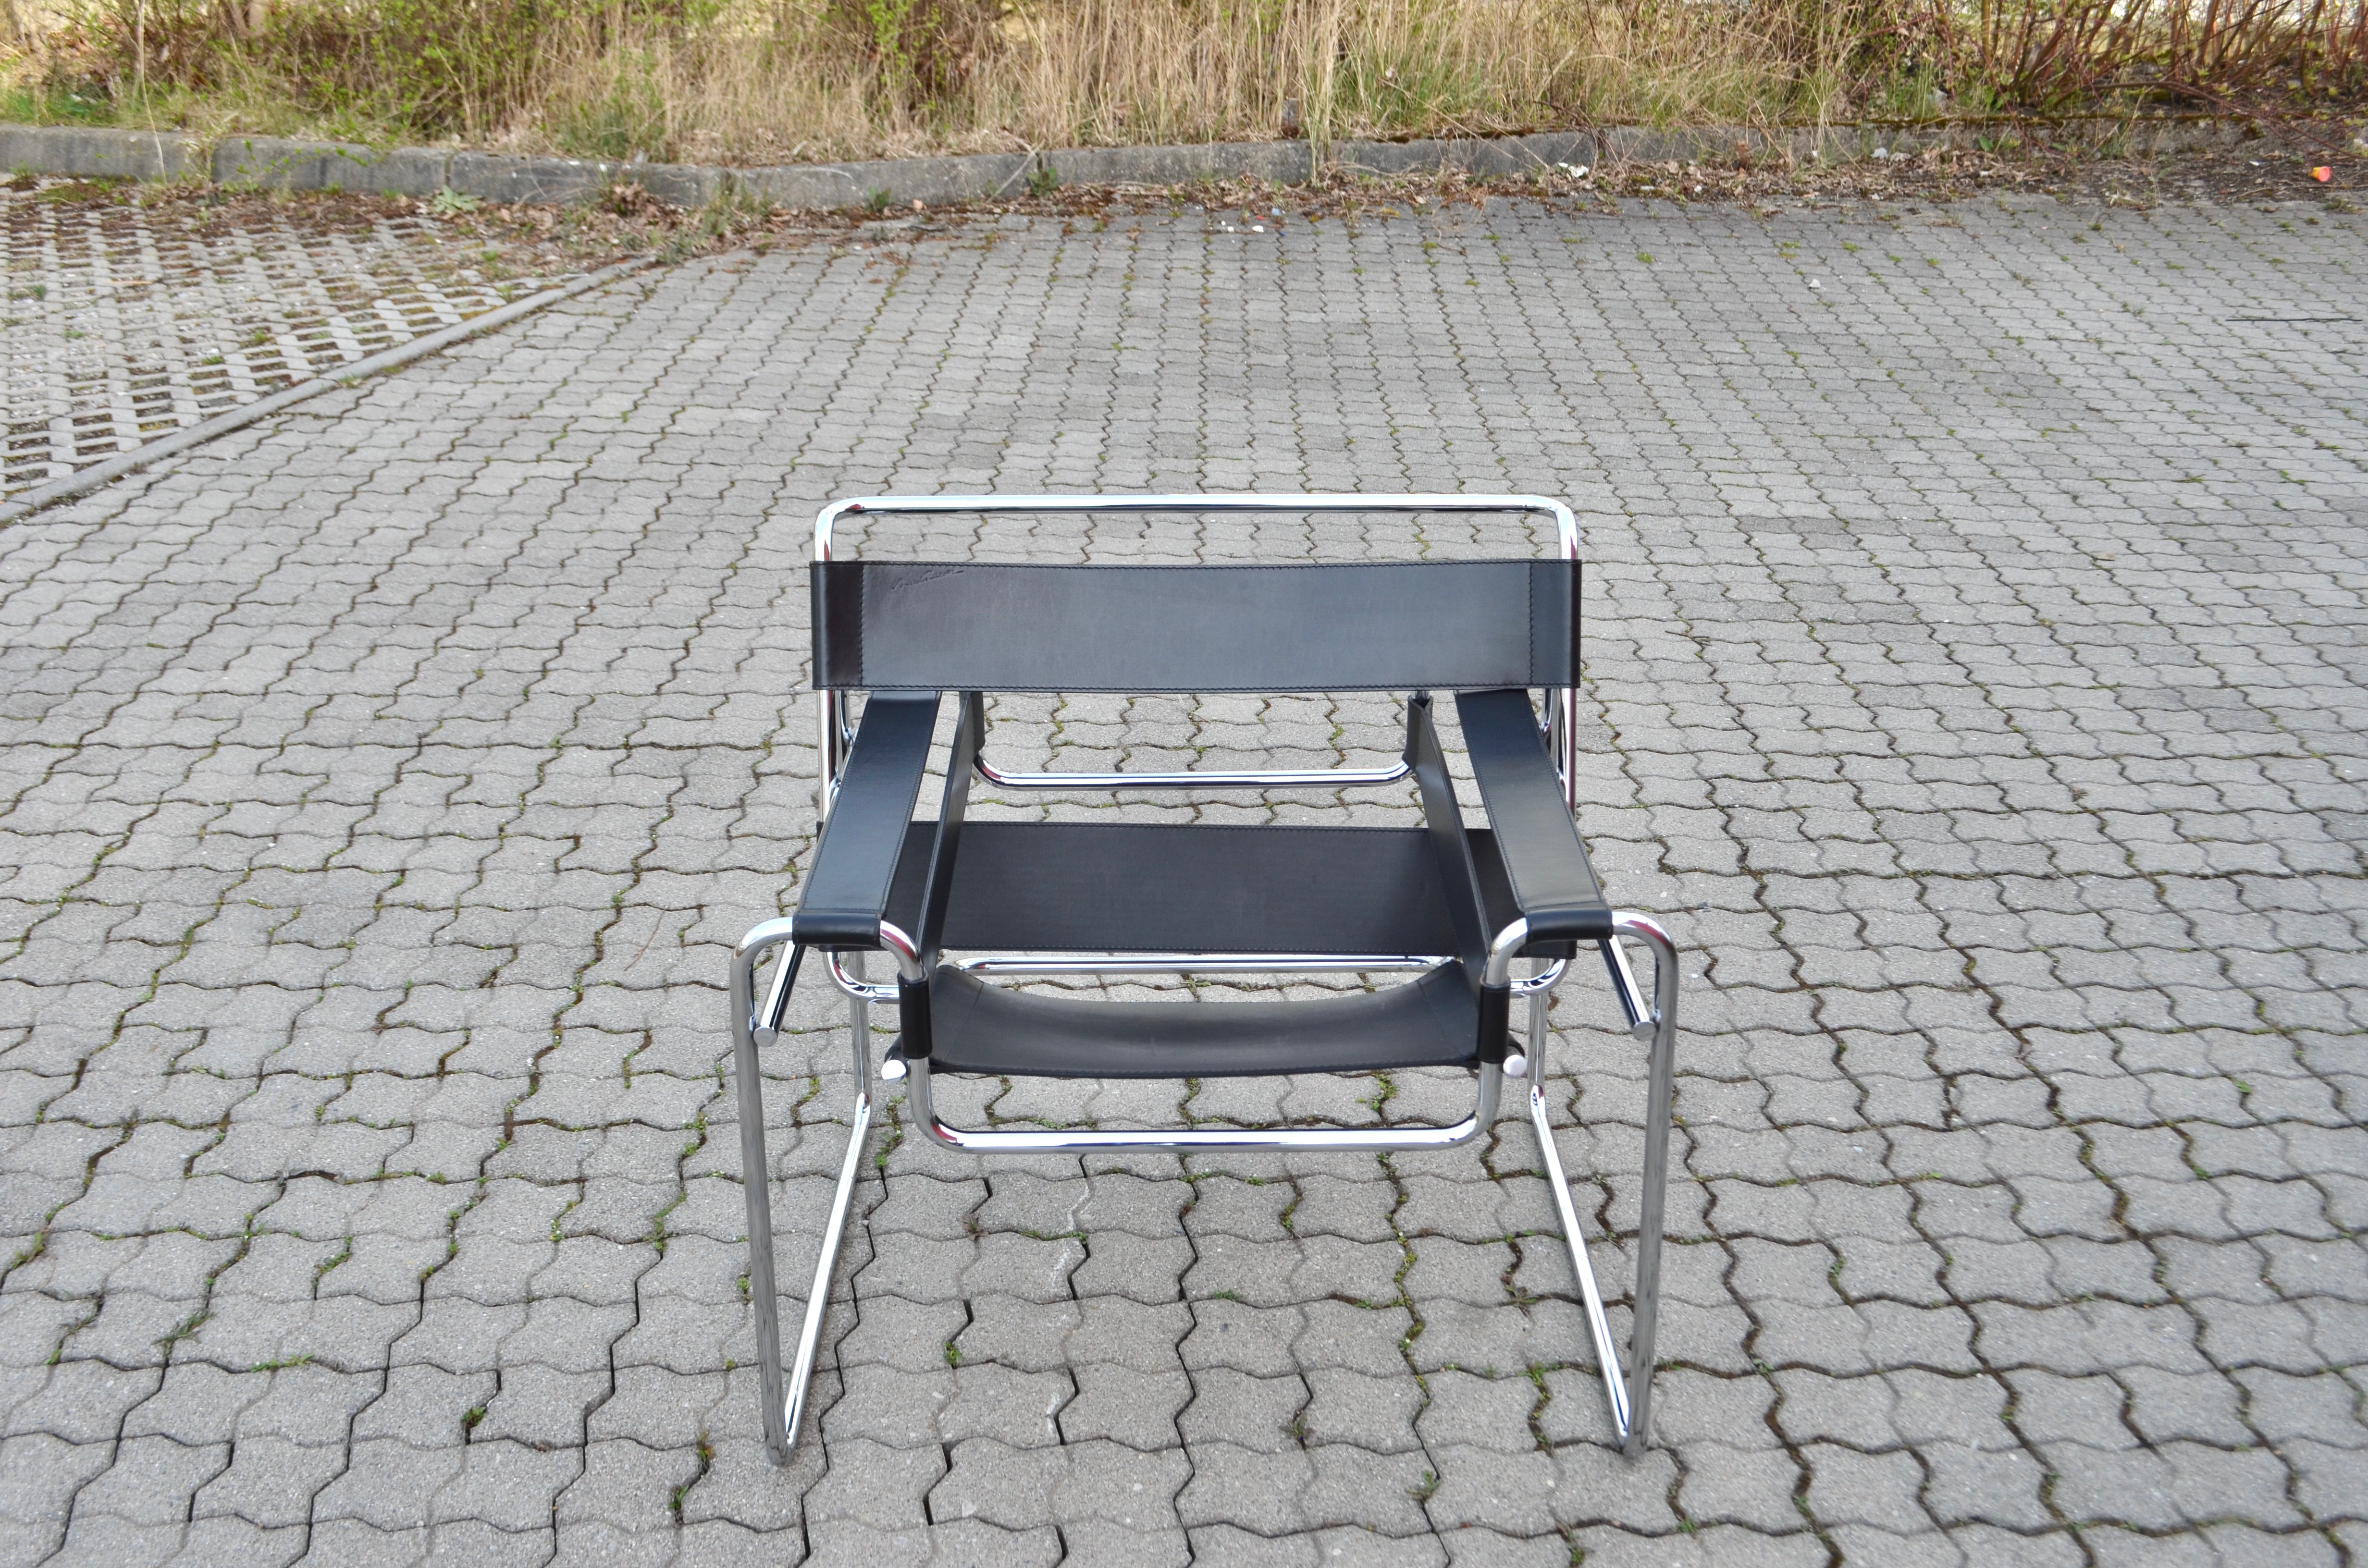 This Wassily chair, in chromed tubular steel and black leather, was designed by Marcel Breuer and produced by Knoll International.
Knoll International production with the Marcel Breuer stamp.
Chrome frame in very good condition.
Also the black